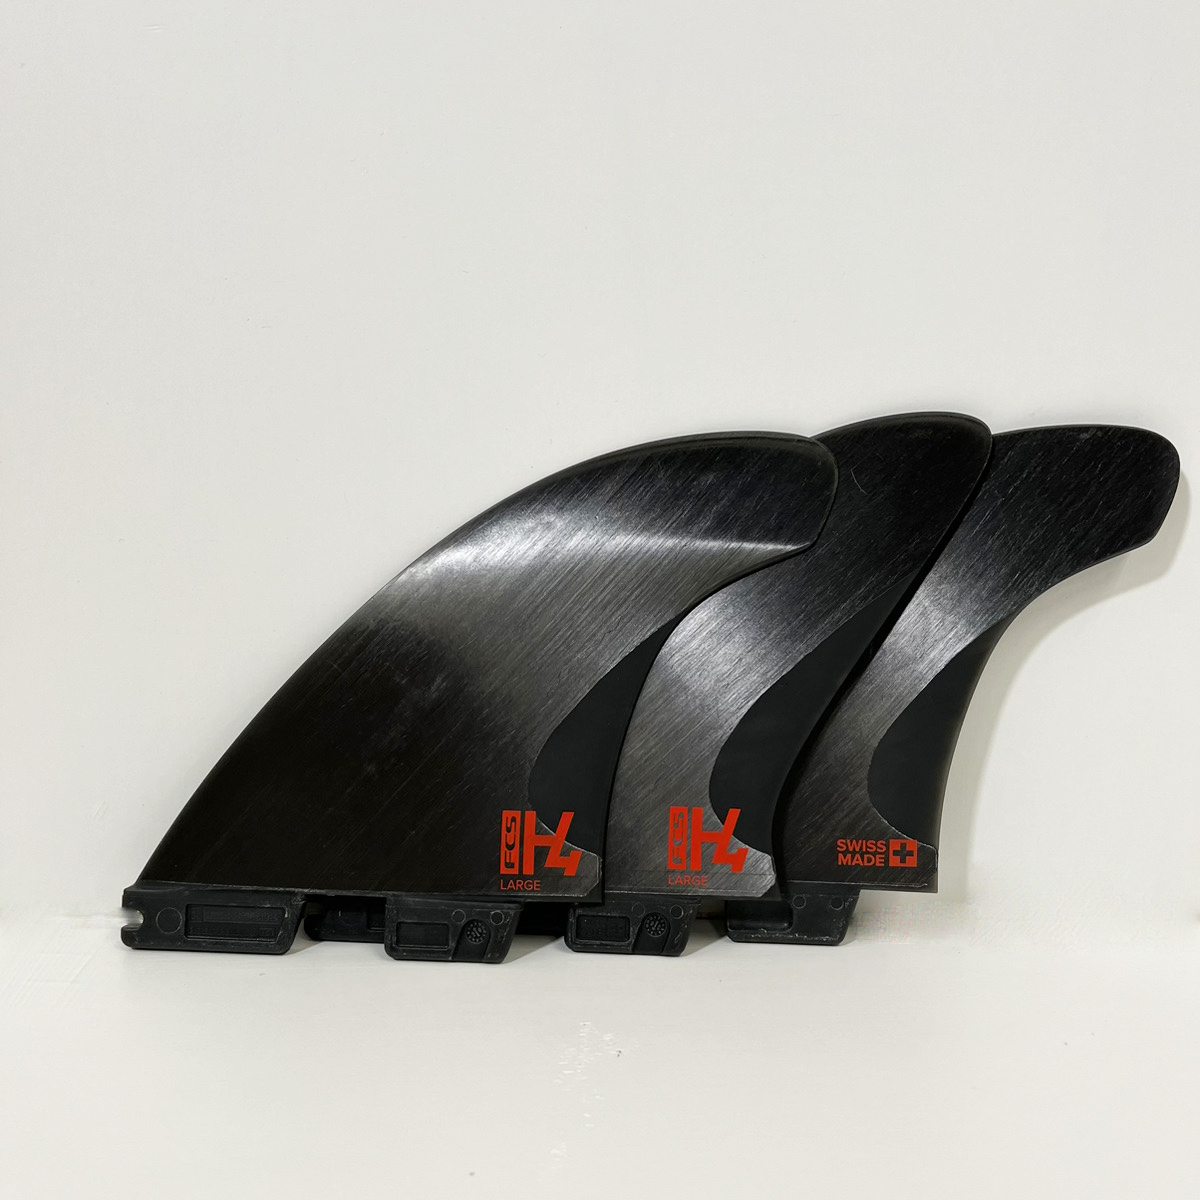 【USED FIN】H4 TRI FINS トライフィン ショートボード用フィン 3本セット スイス製 CARBON SMOKE LARGE 中古フィン